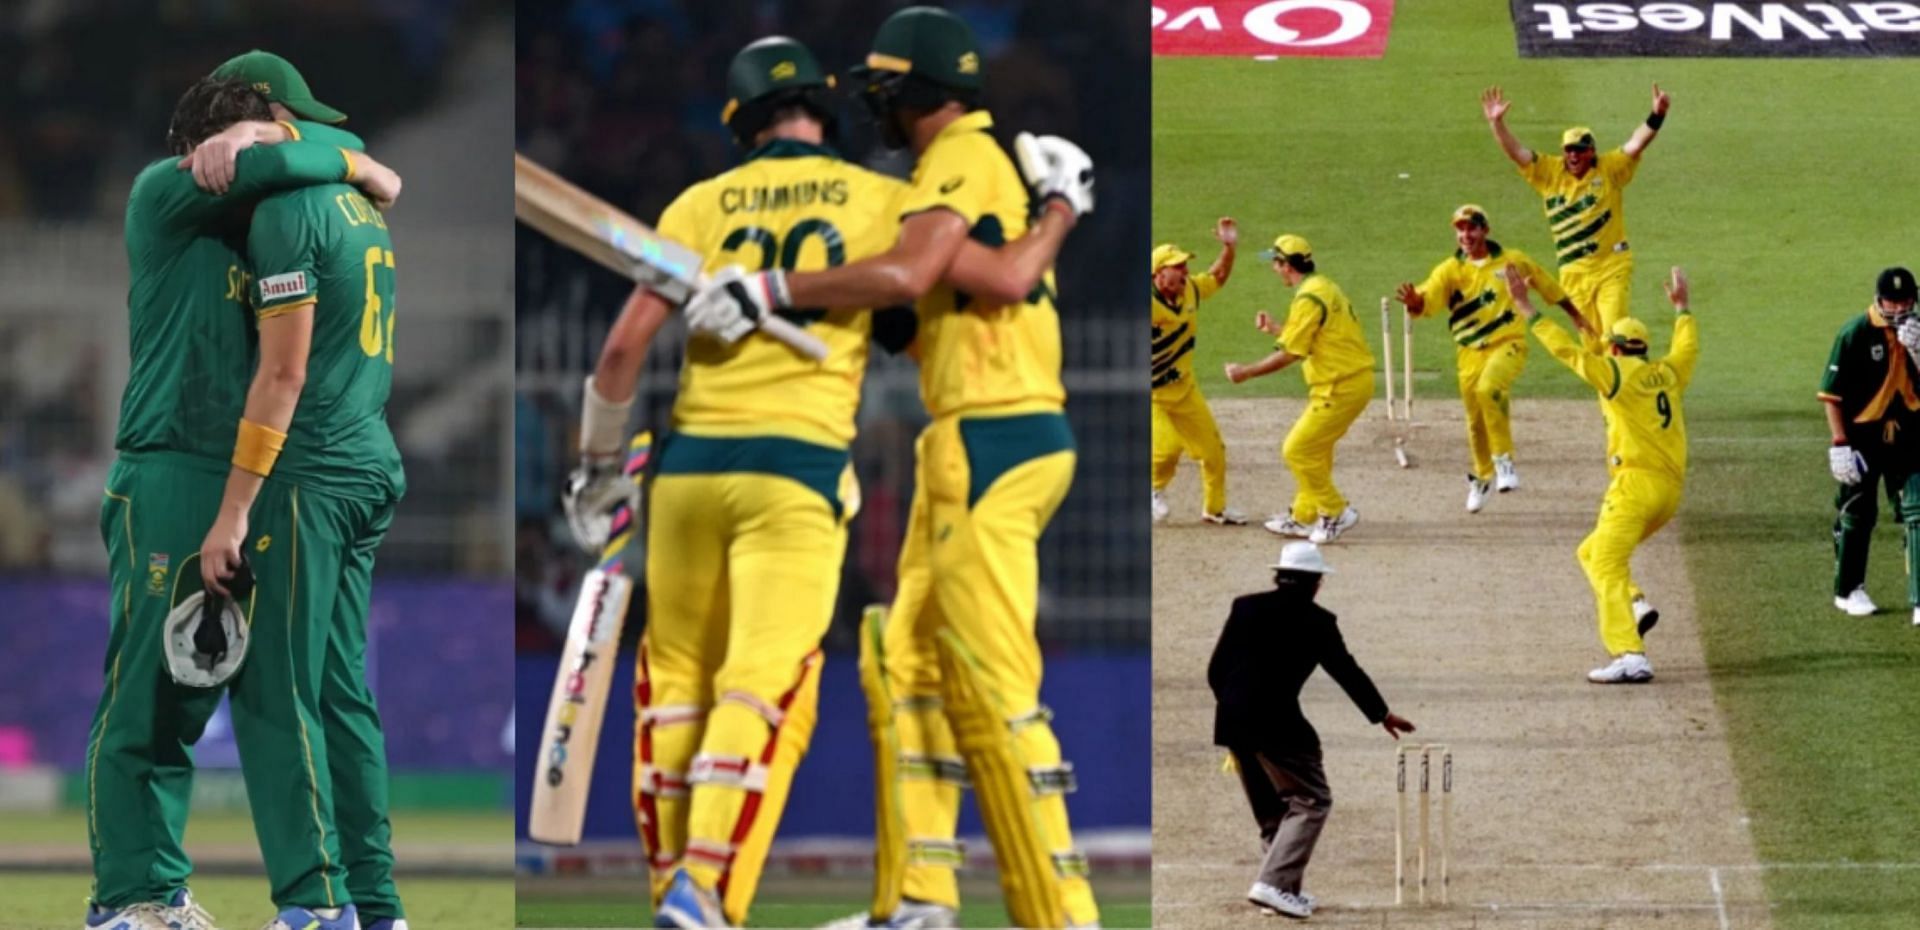 Australia have been involved in some of the best World Cup semi-final games